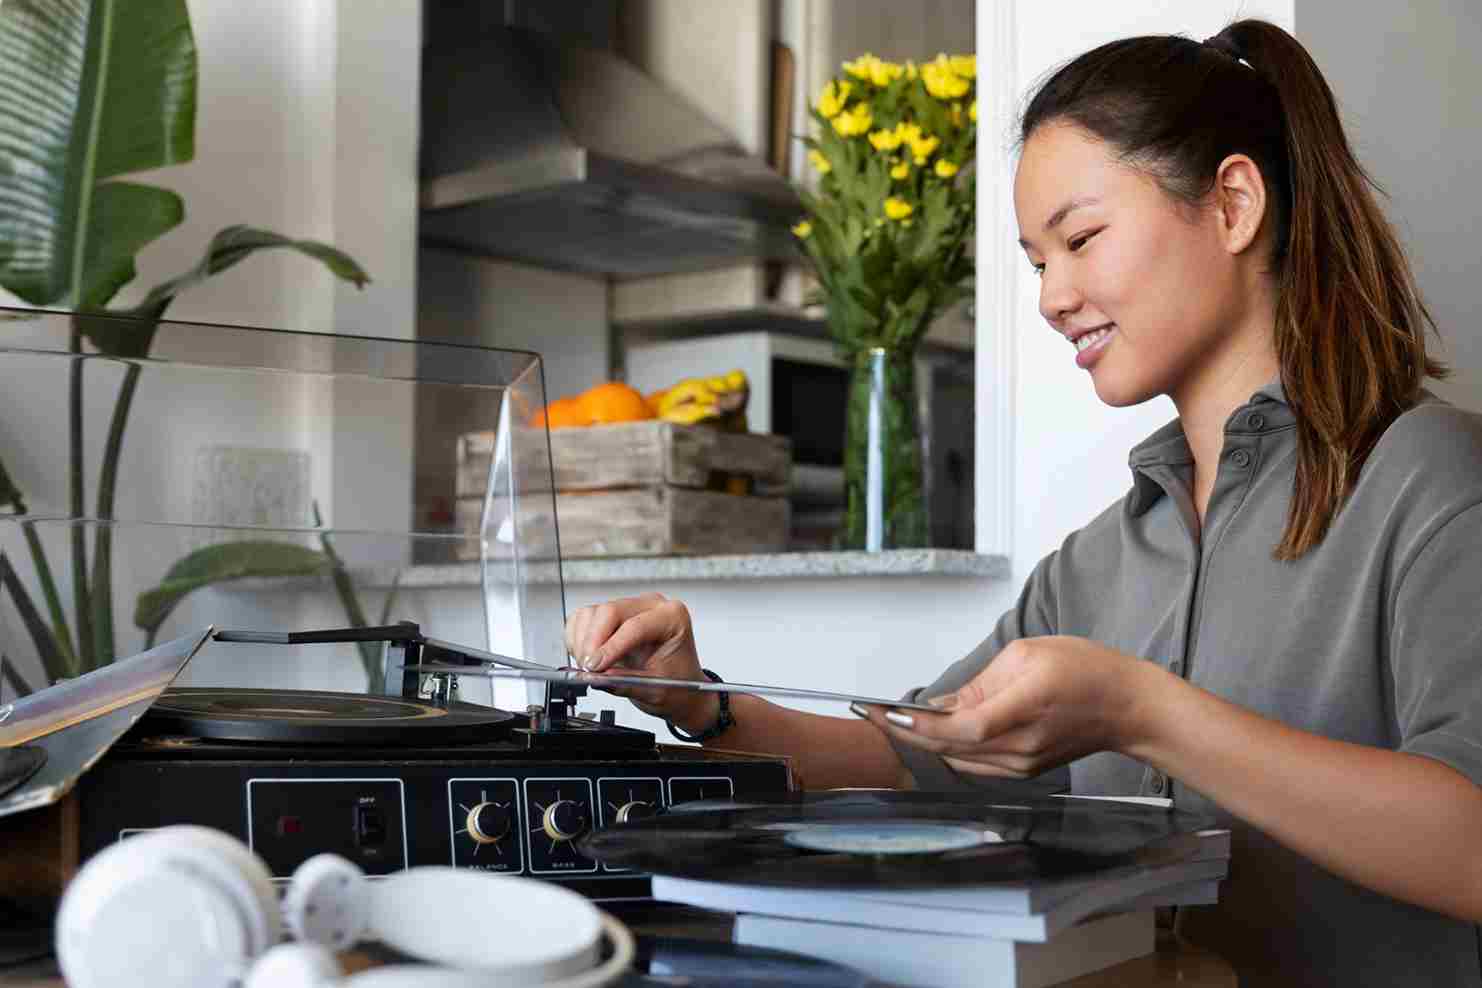 Sustainable Kitchen Solutions: Budget-Friendly Appliance Chafing Dish Burners and Eco-Heat Alternatives